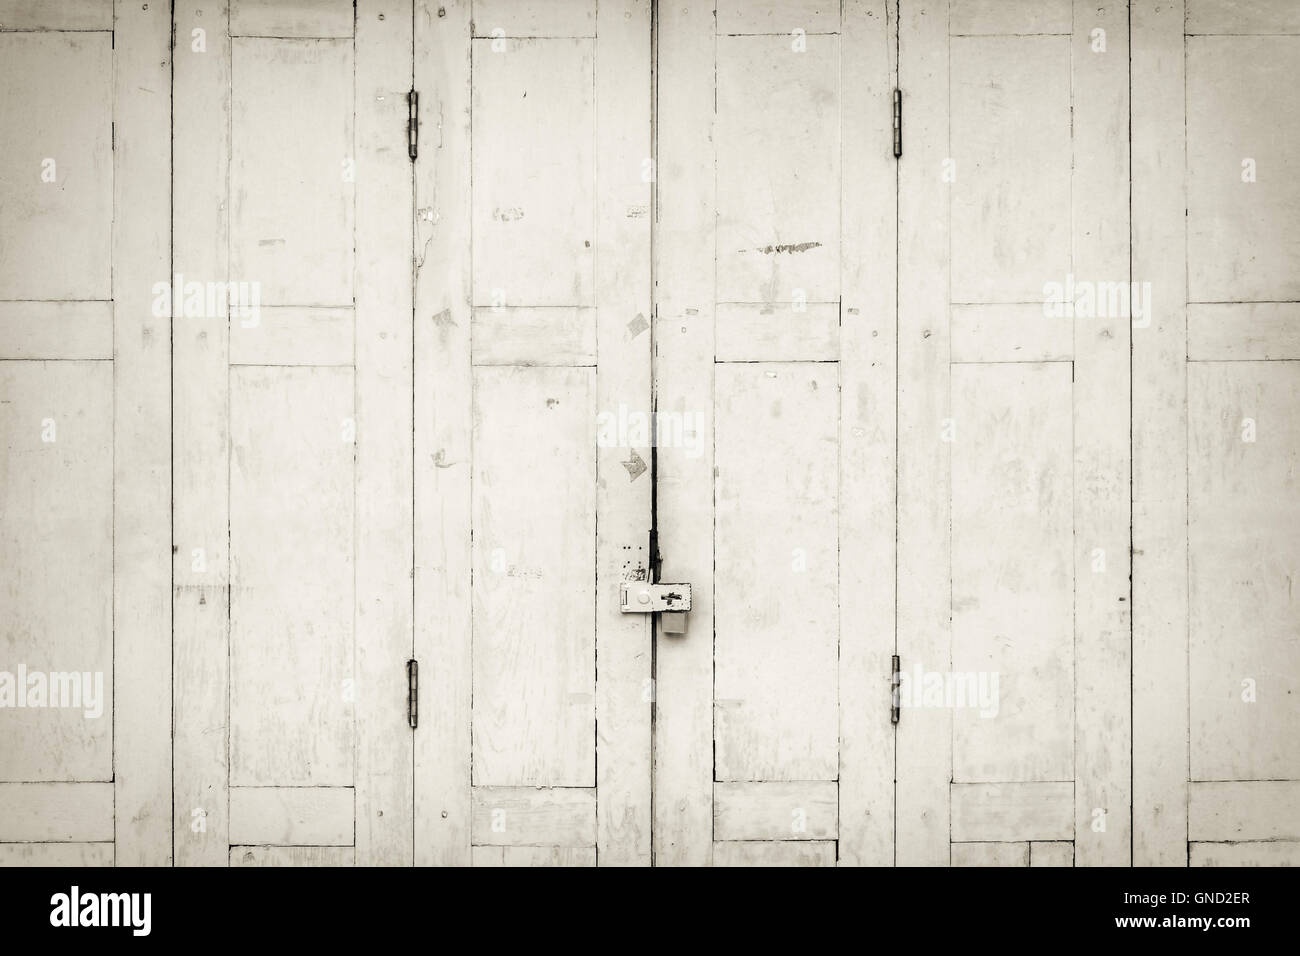 The old grunge folding door closed in B&W. Stock Photo